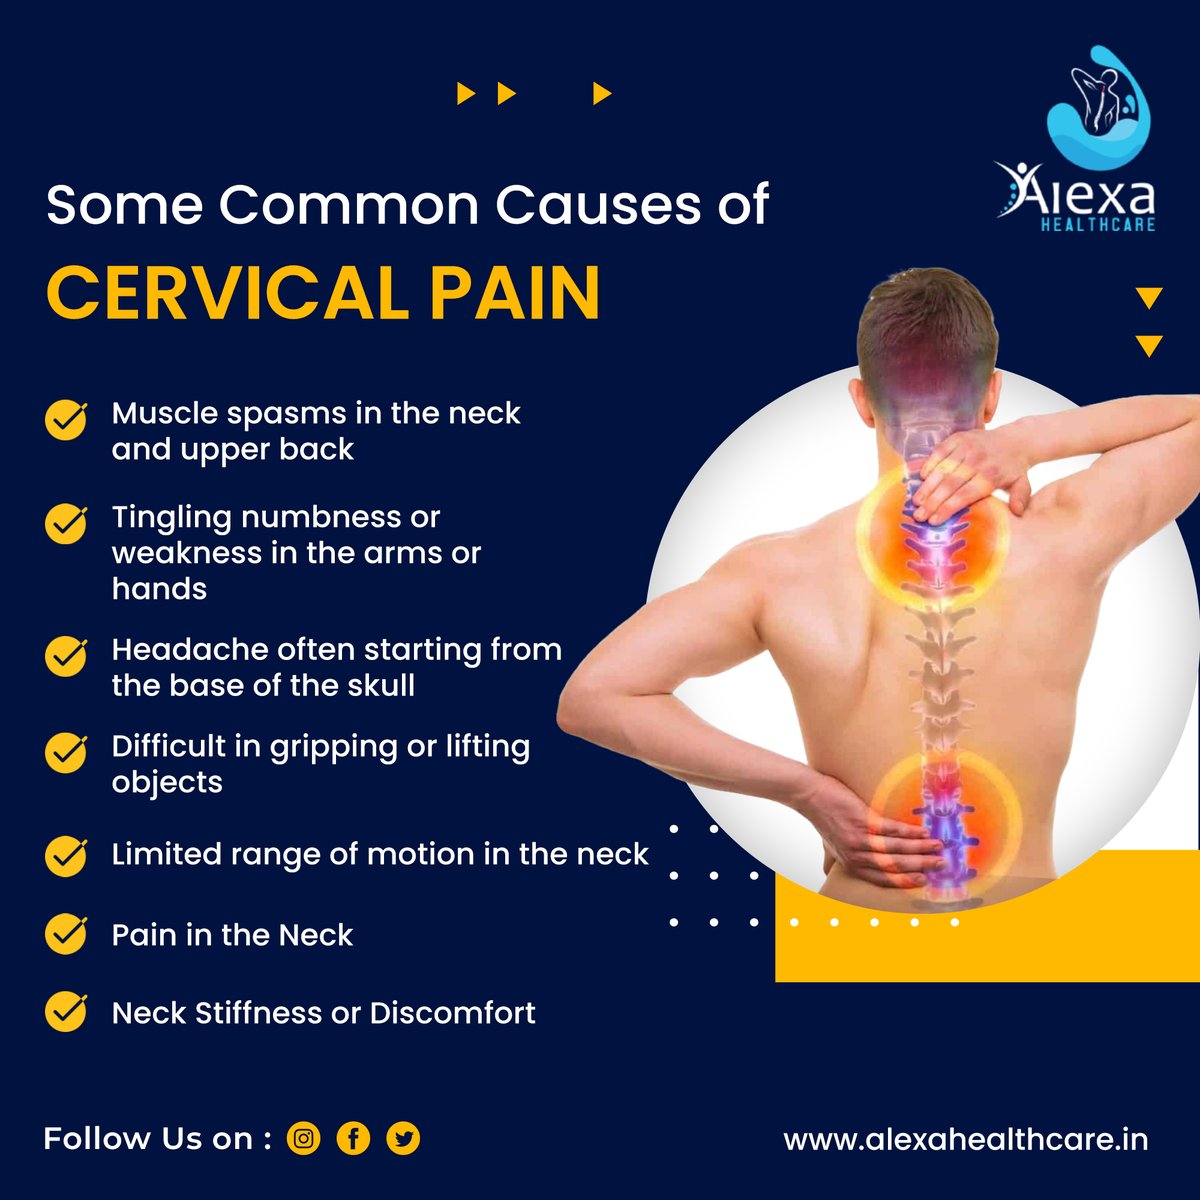 Don't let cervical pain hold you back—find the cause and the cure. 
Book your Appointment
☎️8777-69-4040 
🌐alexahealthcare.in 
📍Alexa Active Aging Snehodiya Senior Living BC Block Street No 165, Newtown AA1, Kolkata-700156  
#CervicalPain #NeckPain #PostureIssues